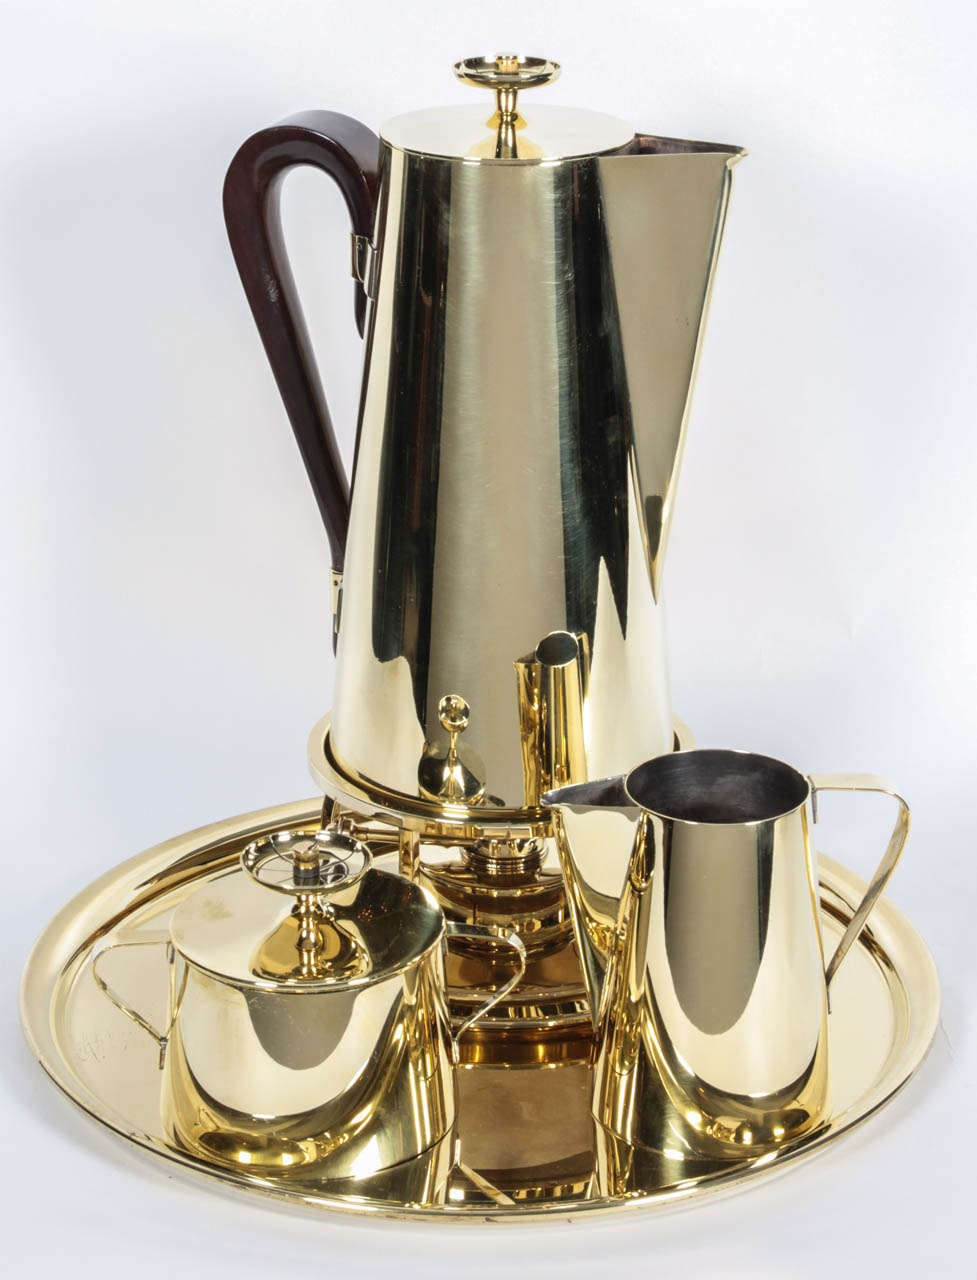 Exceptional coffee service in polished brass by Tommi Parzinger comprised of a round tray, coffee pot with stand and warmer, creamer and sugar bowl.